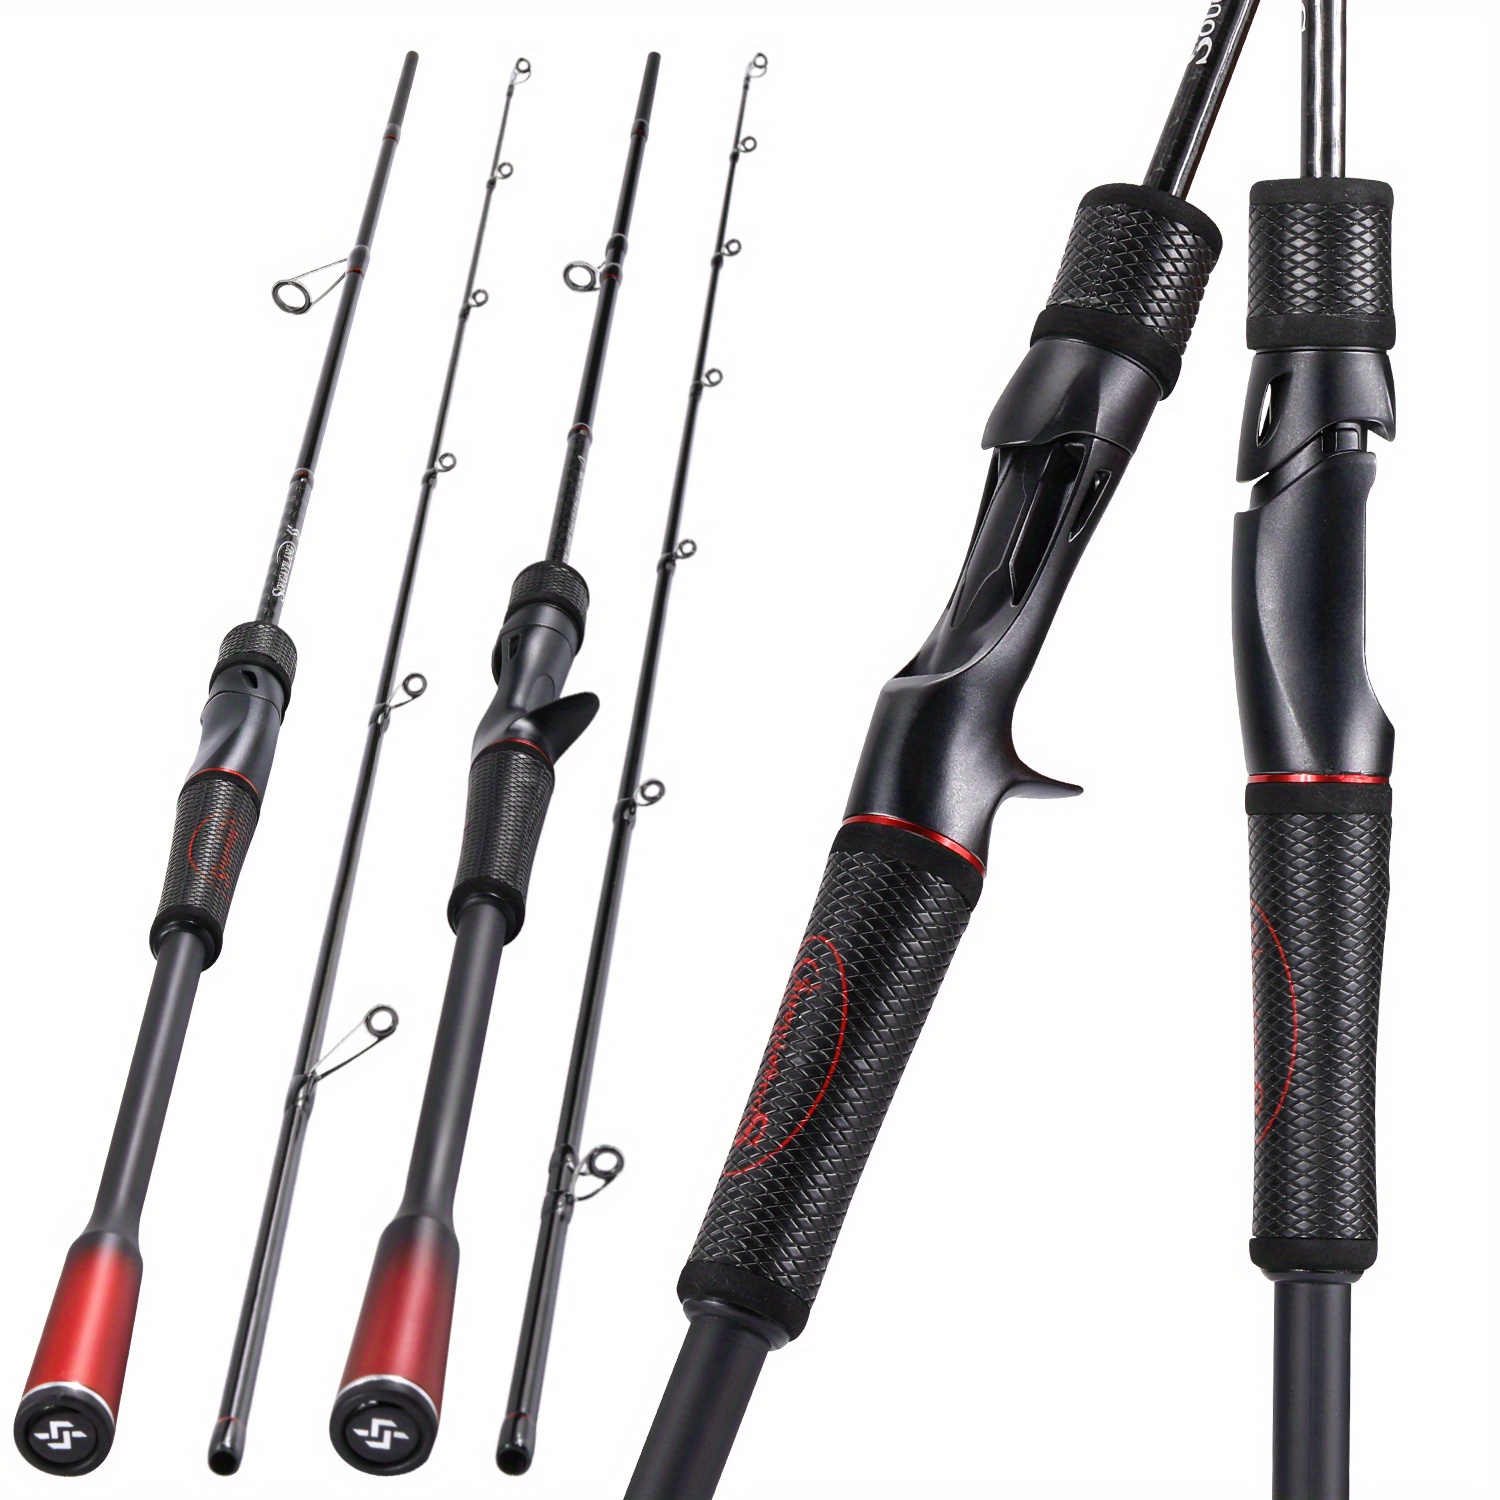 One Bass Fishing Pole 24 Ton Carbon Fiber Casting and Spinning Rods - Two Pieces, SuperPolymer Handle Fishing Rod for Bass Fishing